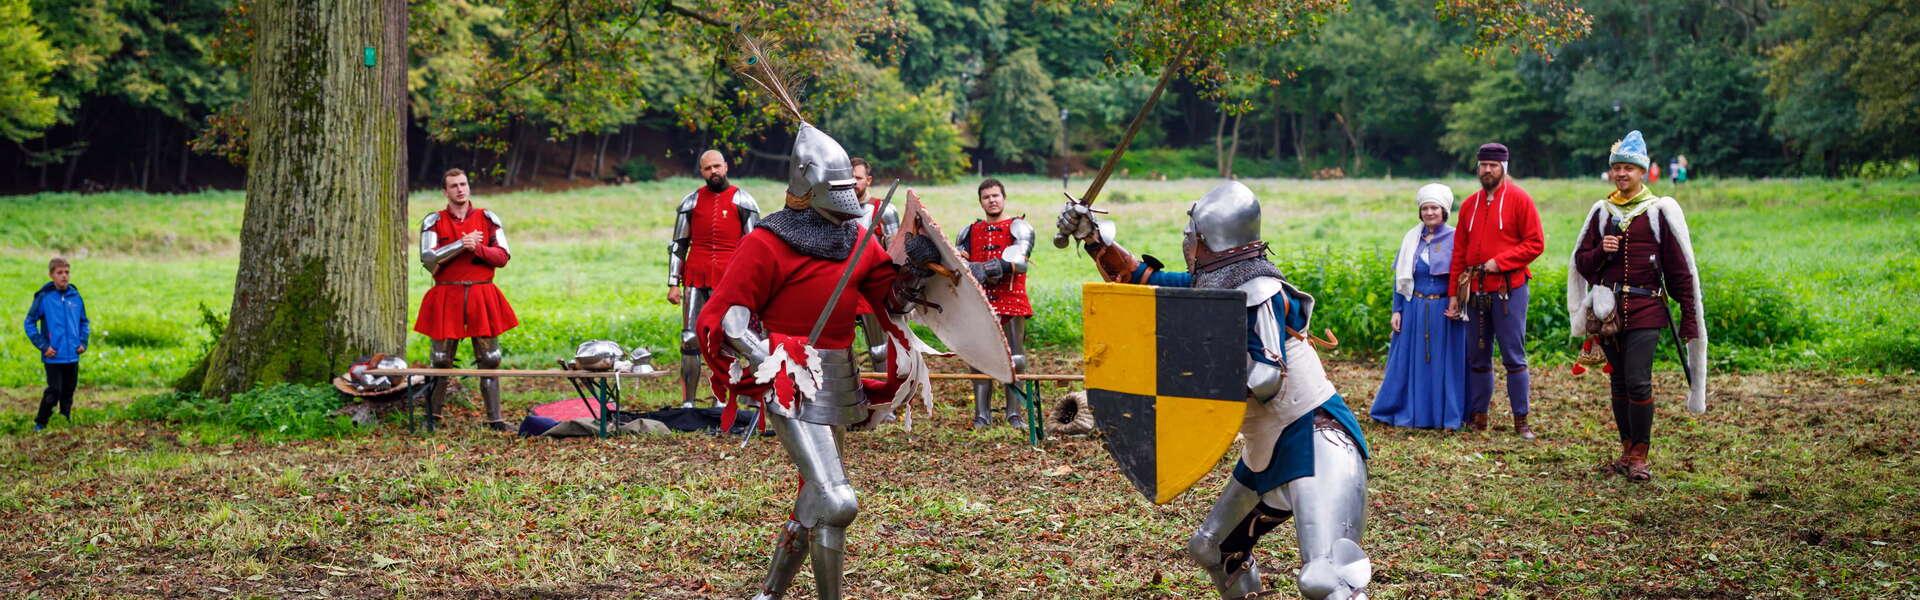 Two men dressed as knights re-enact a battle